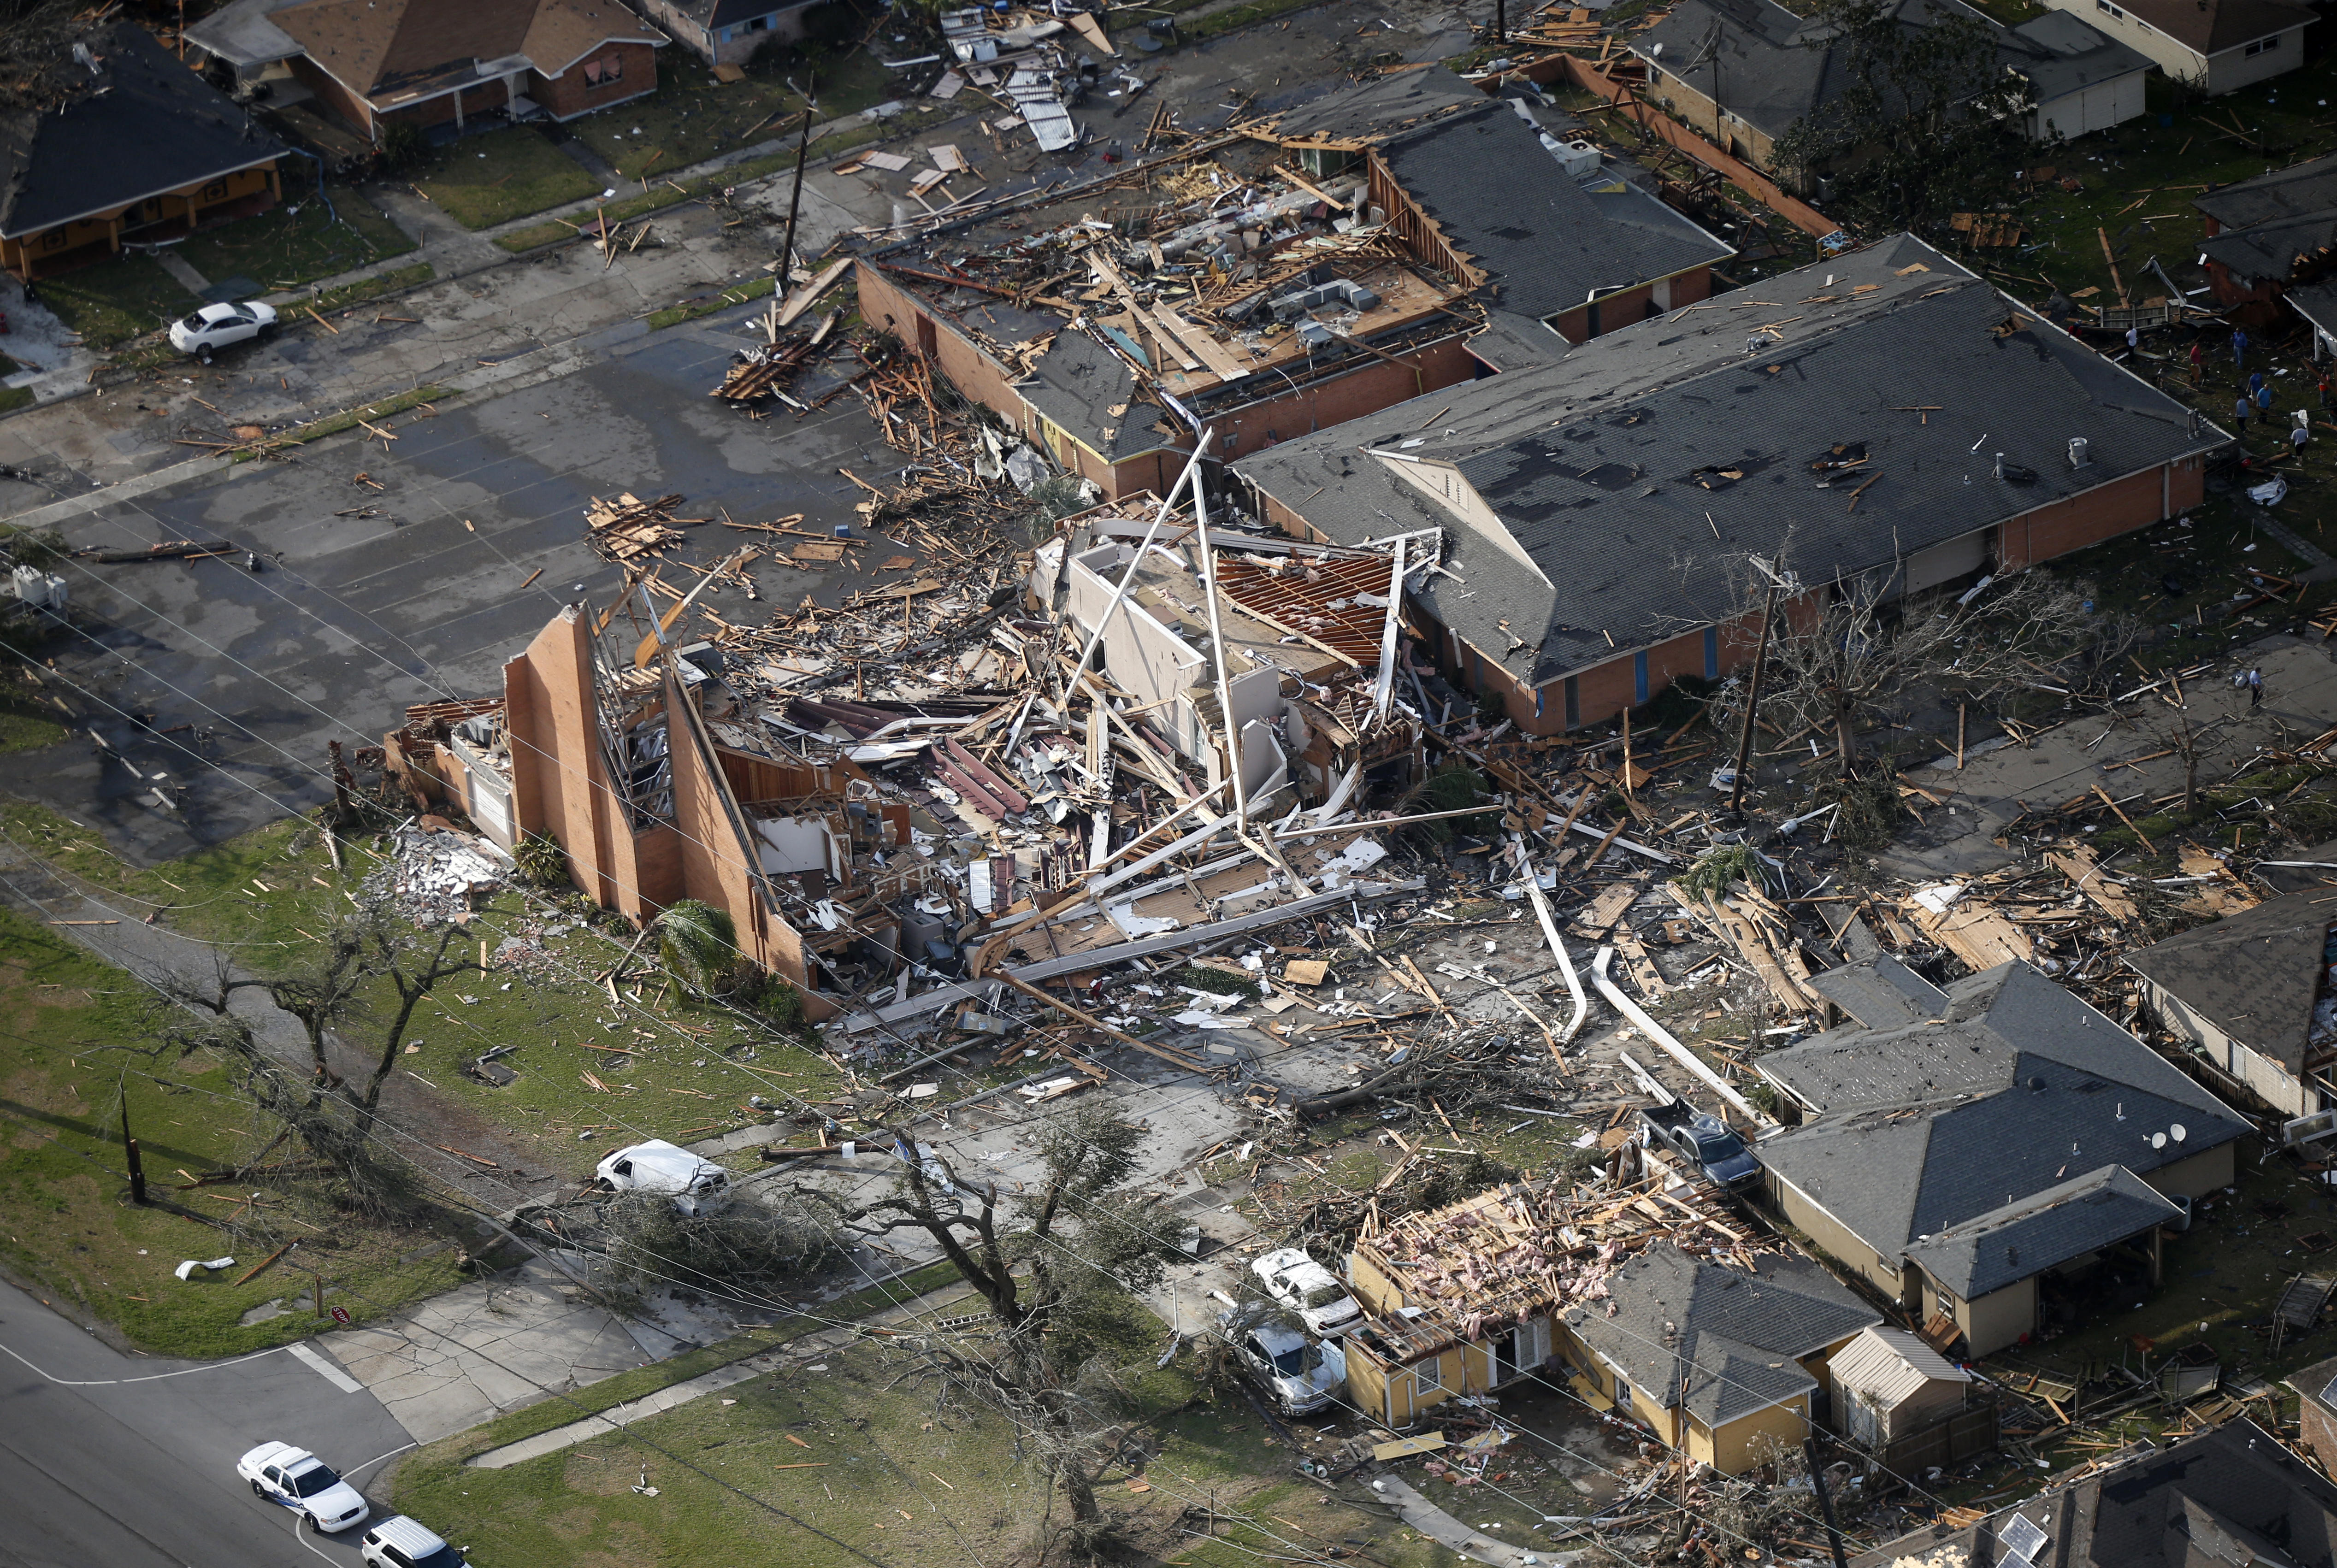 Louisiana in state of emergency after tornadoes cause heavy damage